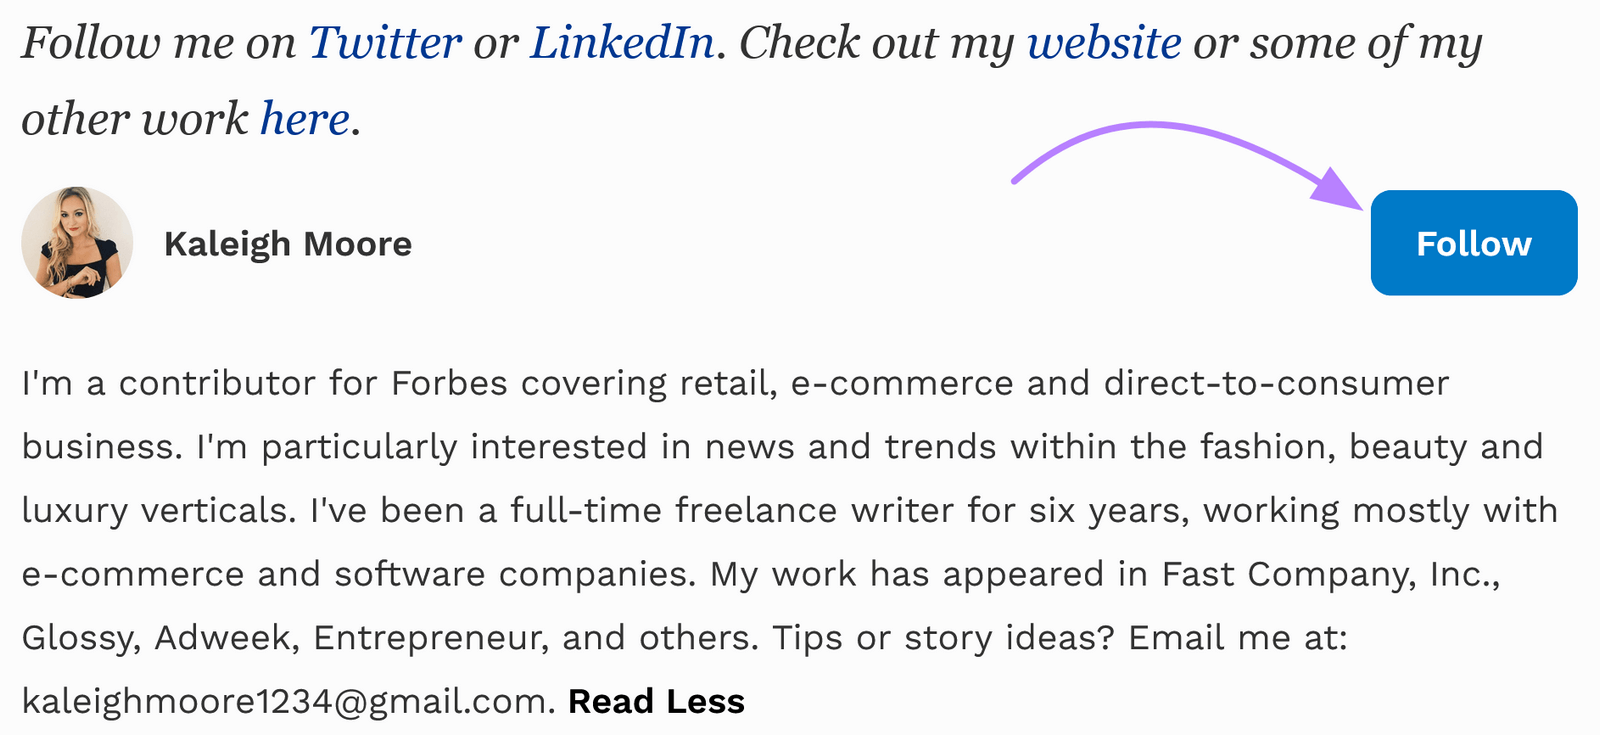 example of a blog post with embedded LinkedIn follow button